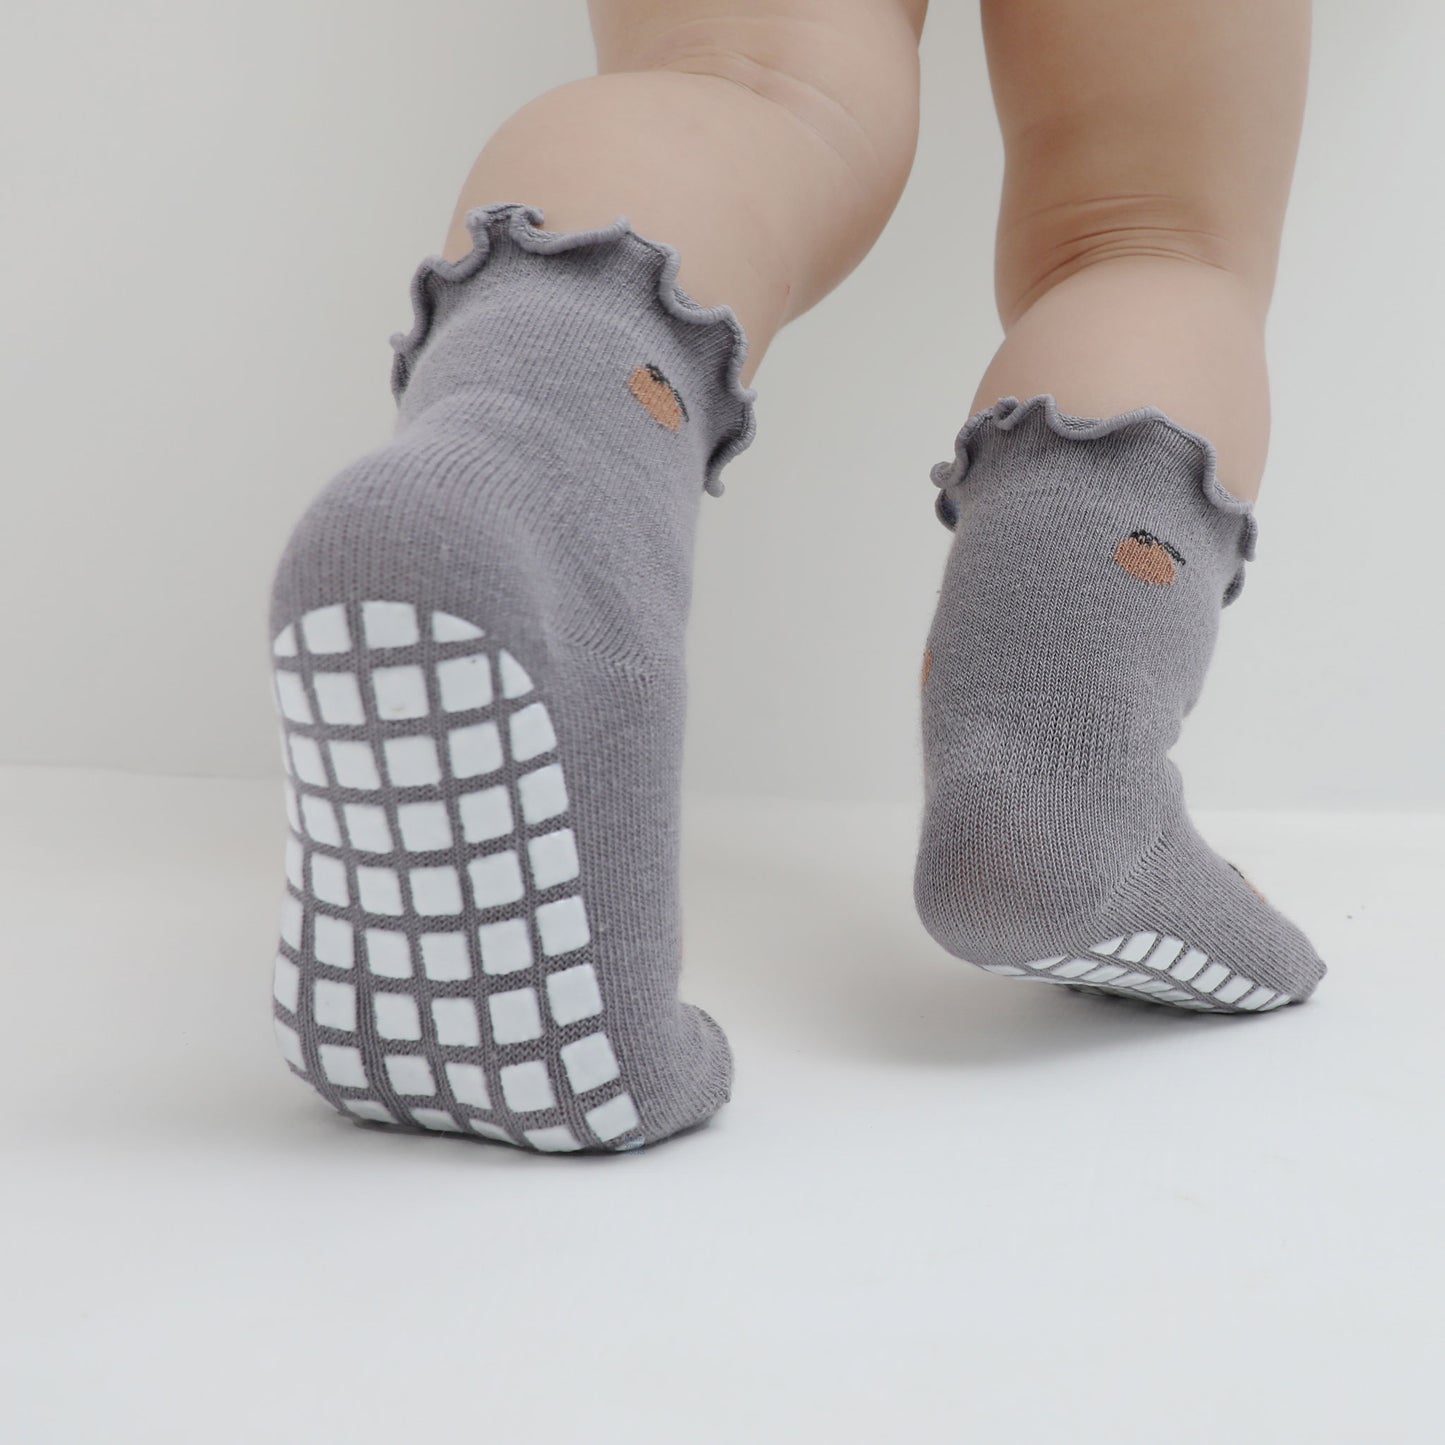 New- Little Wonder Things - 4 Pairs of Stay-On Baby & Toddler Non-Slip Socks